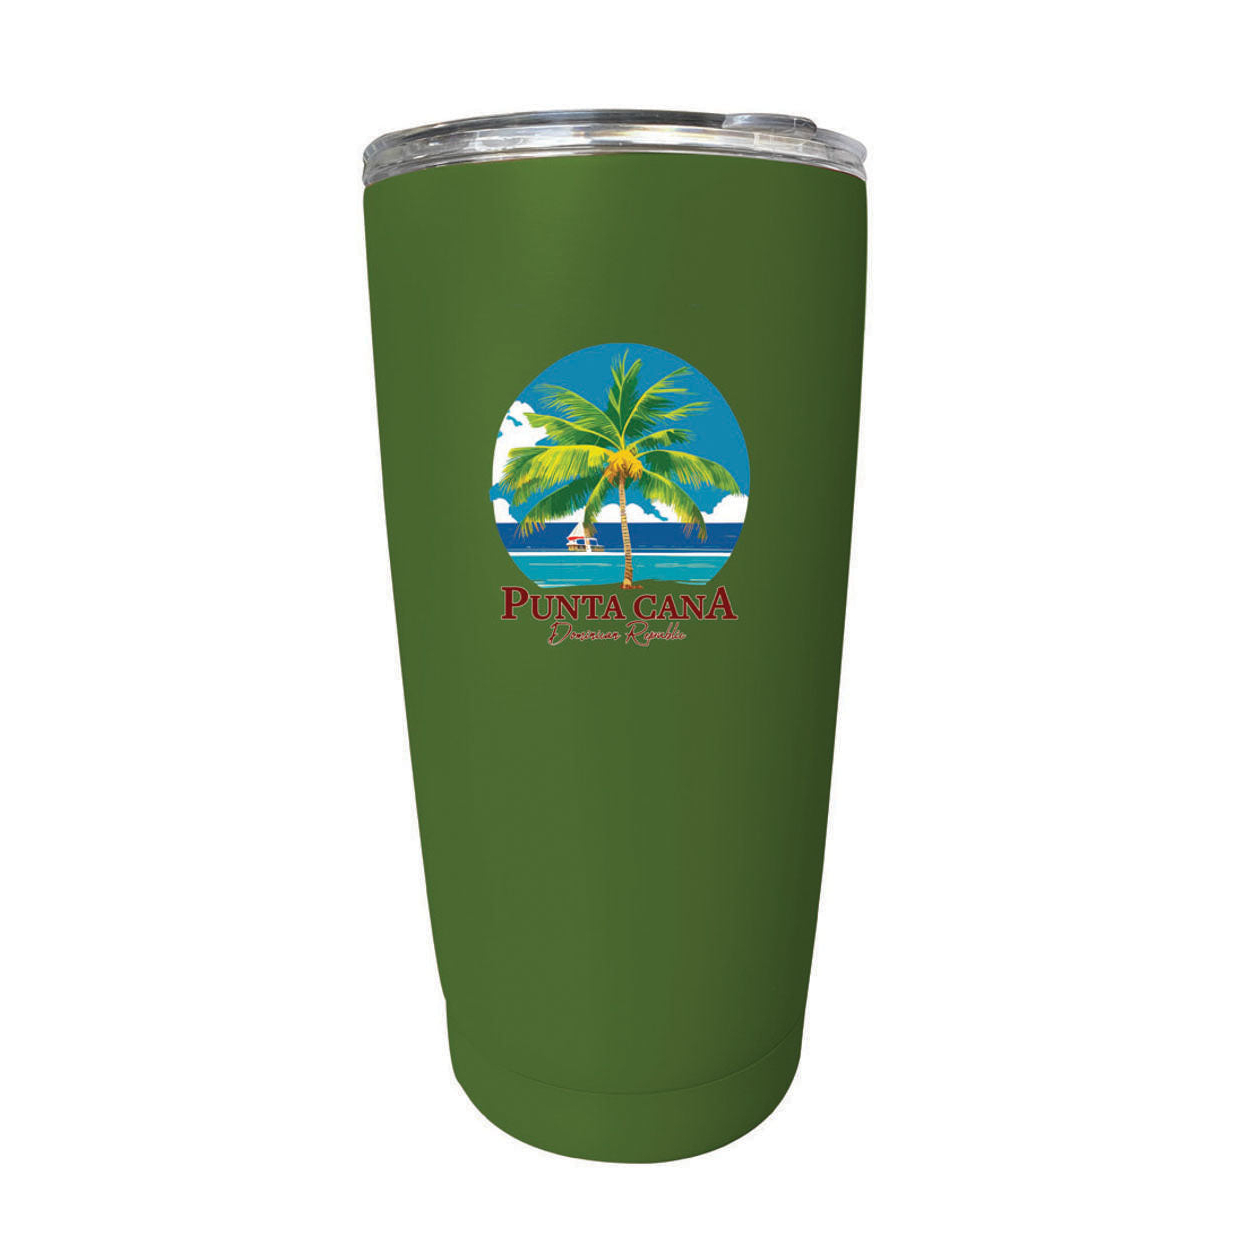 Punta Cana Dominican Republic Souvenir 16 Oz Stainless Steel Insulated Tumbler - Green, PALM